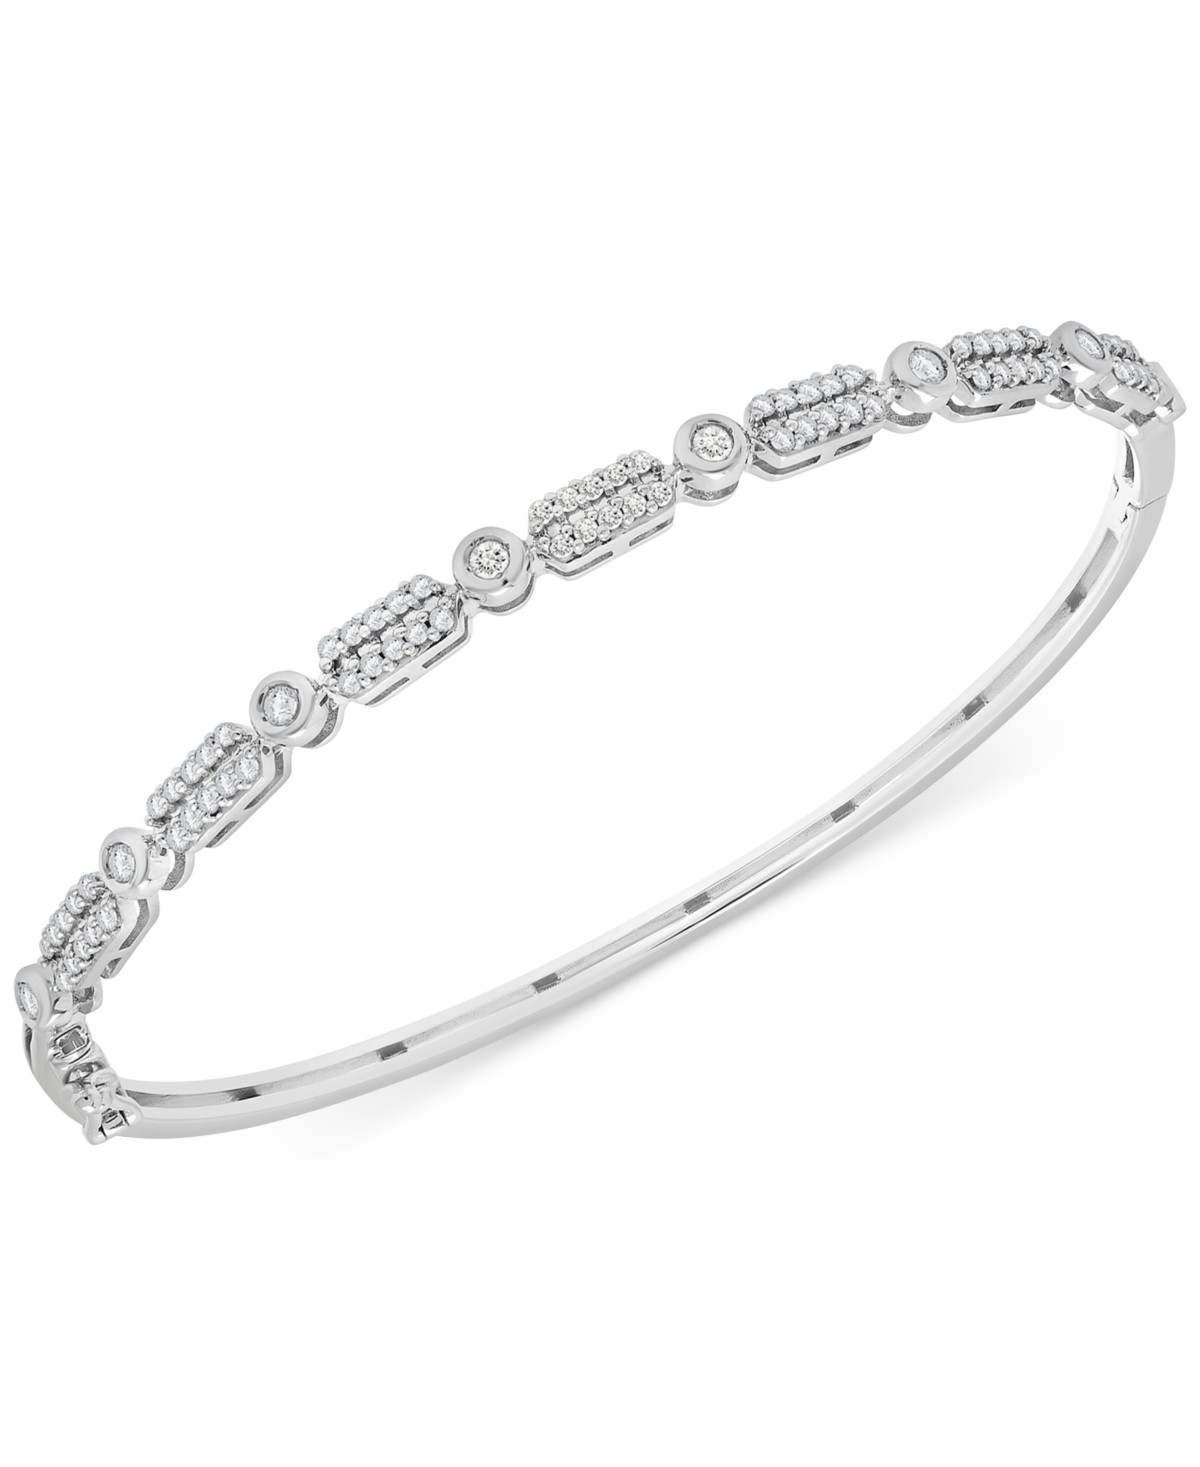 Diamond Bangle Bracelet (1/2 ct. t.w.), in Sterling Silver, 14k Gold-Plated Sterling Silver or 14k Rose Gold-Plated Sterling Silver, Created f